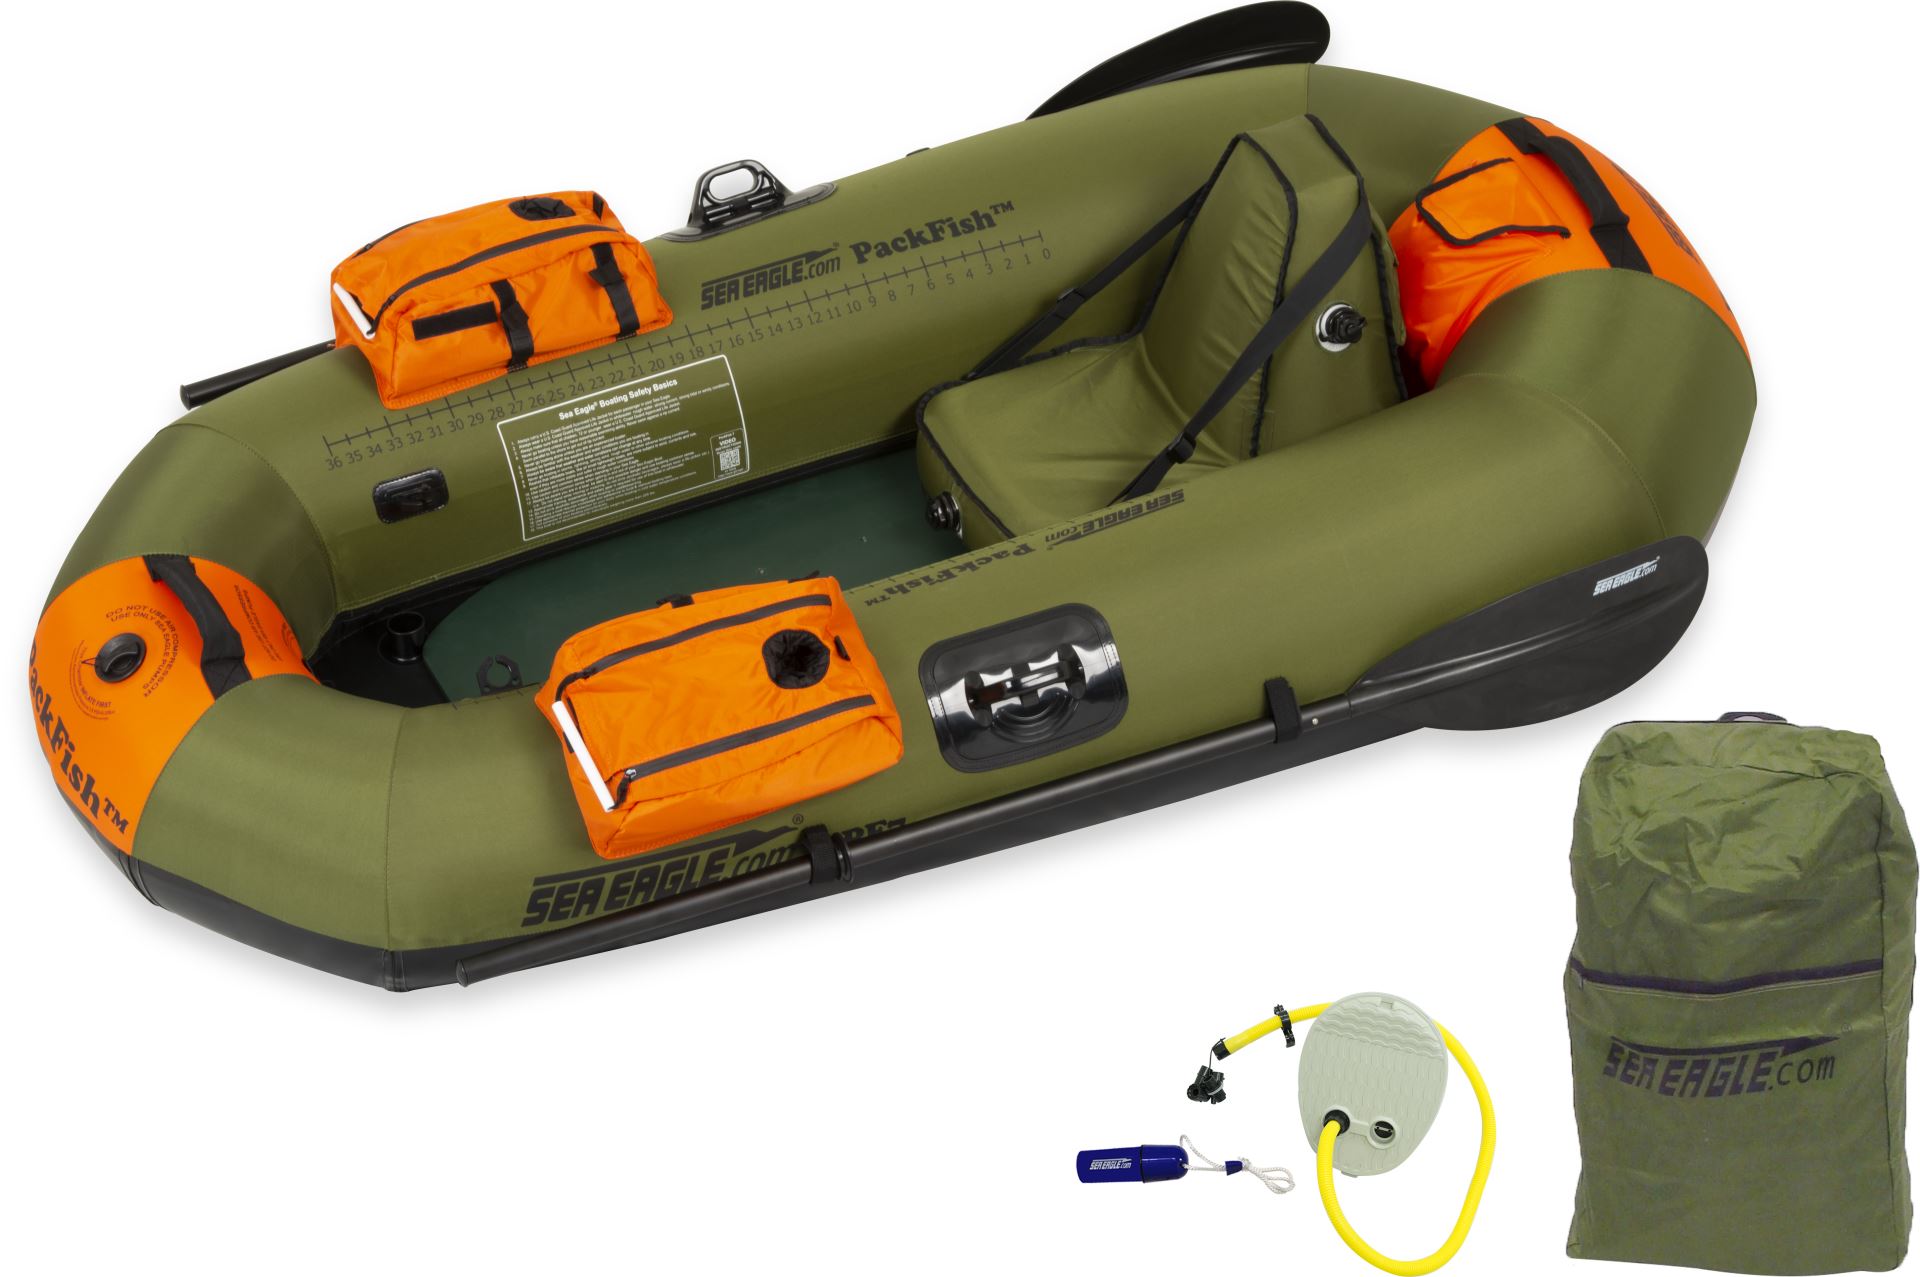 Fishing Inflatable Boats & Parts  6-Person, 4-Person, 2-Person, 1-Person 